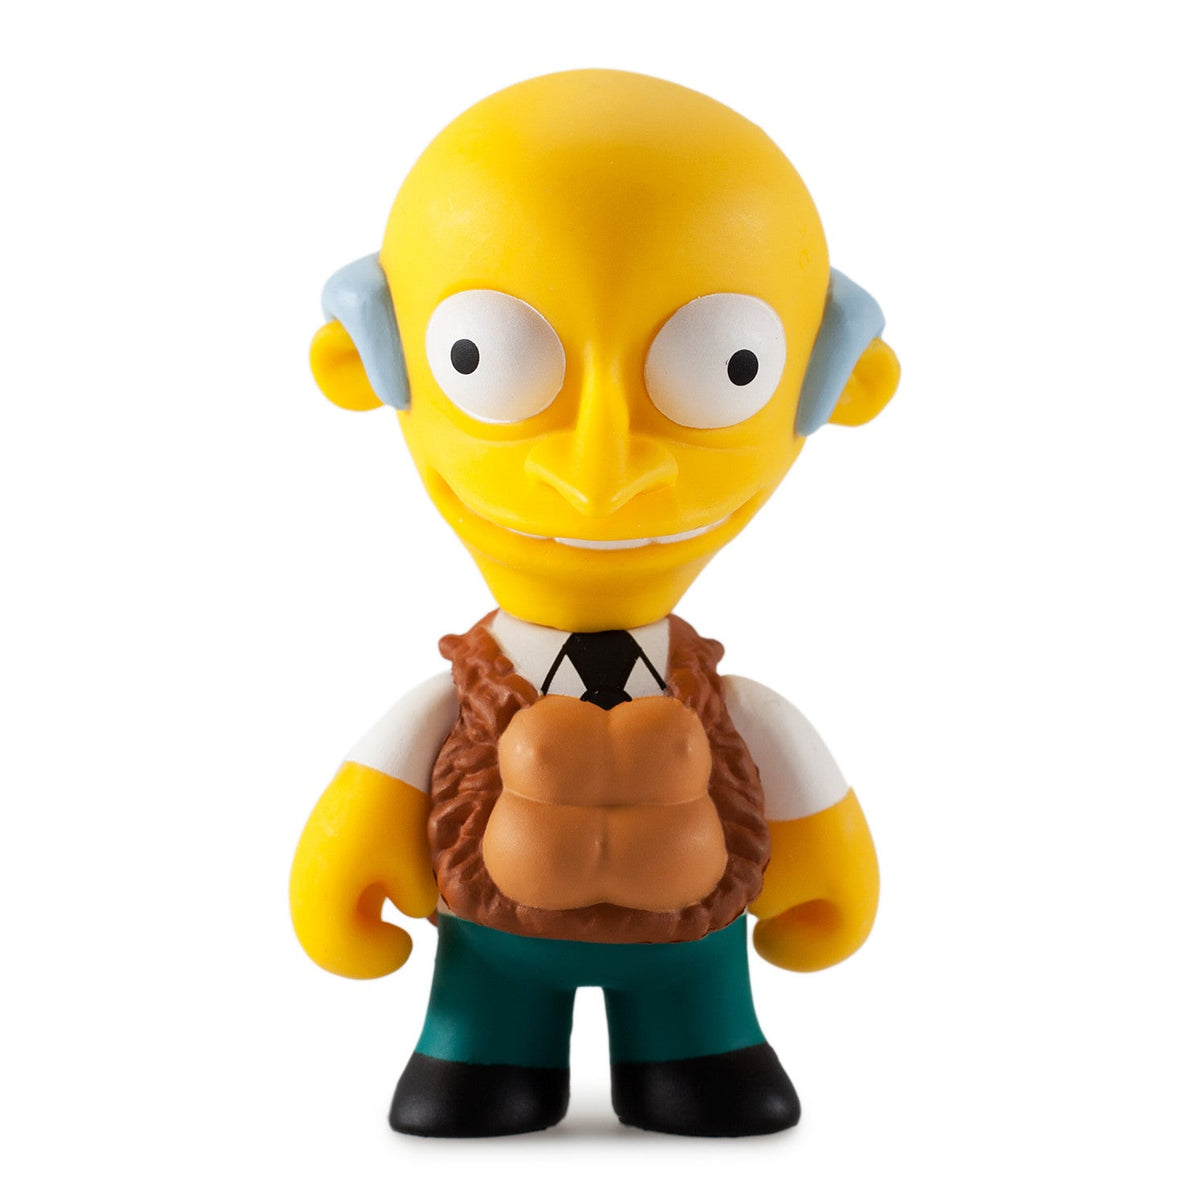 Mr. Burns - See My Vest - The Simpsons 25th Anniversary Series by Kidrobot (Chase)